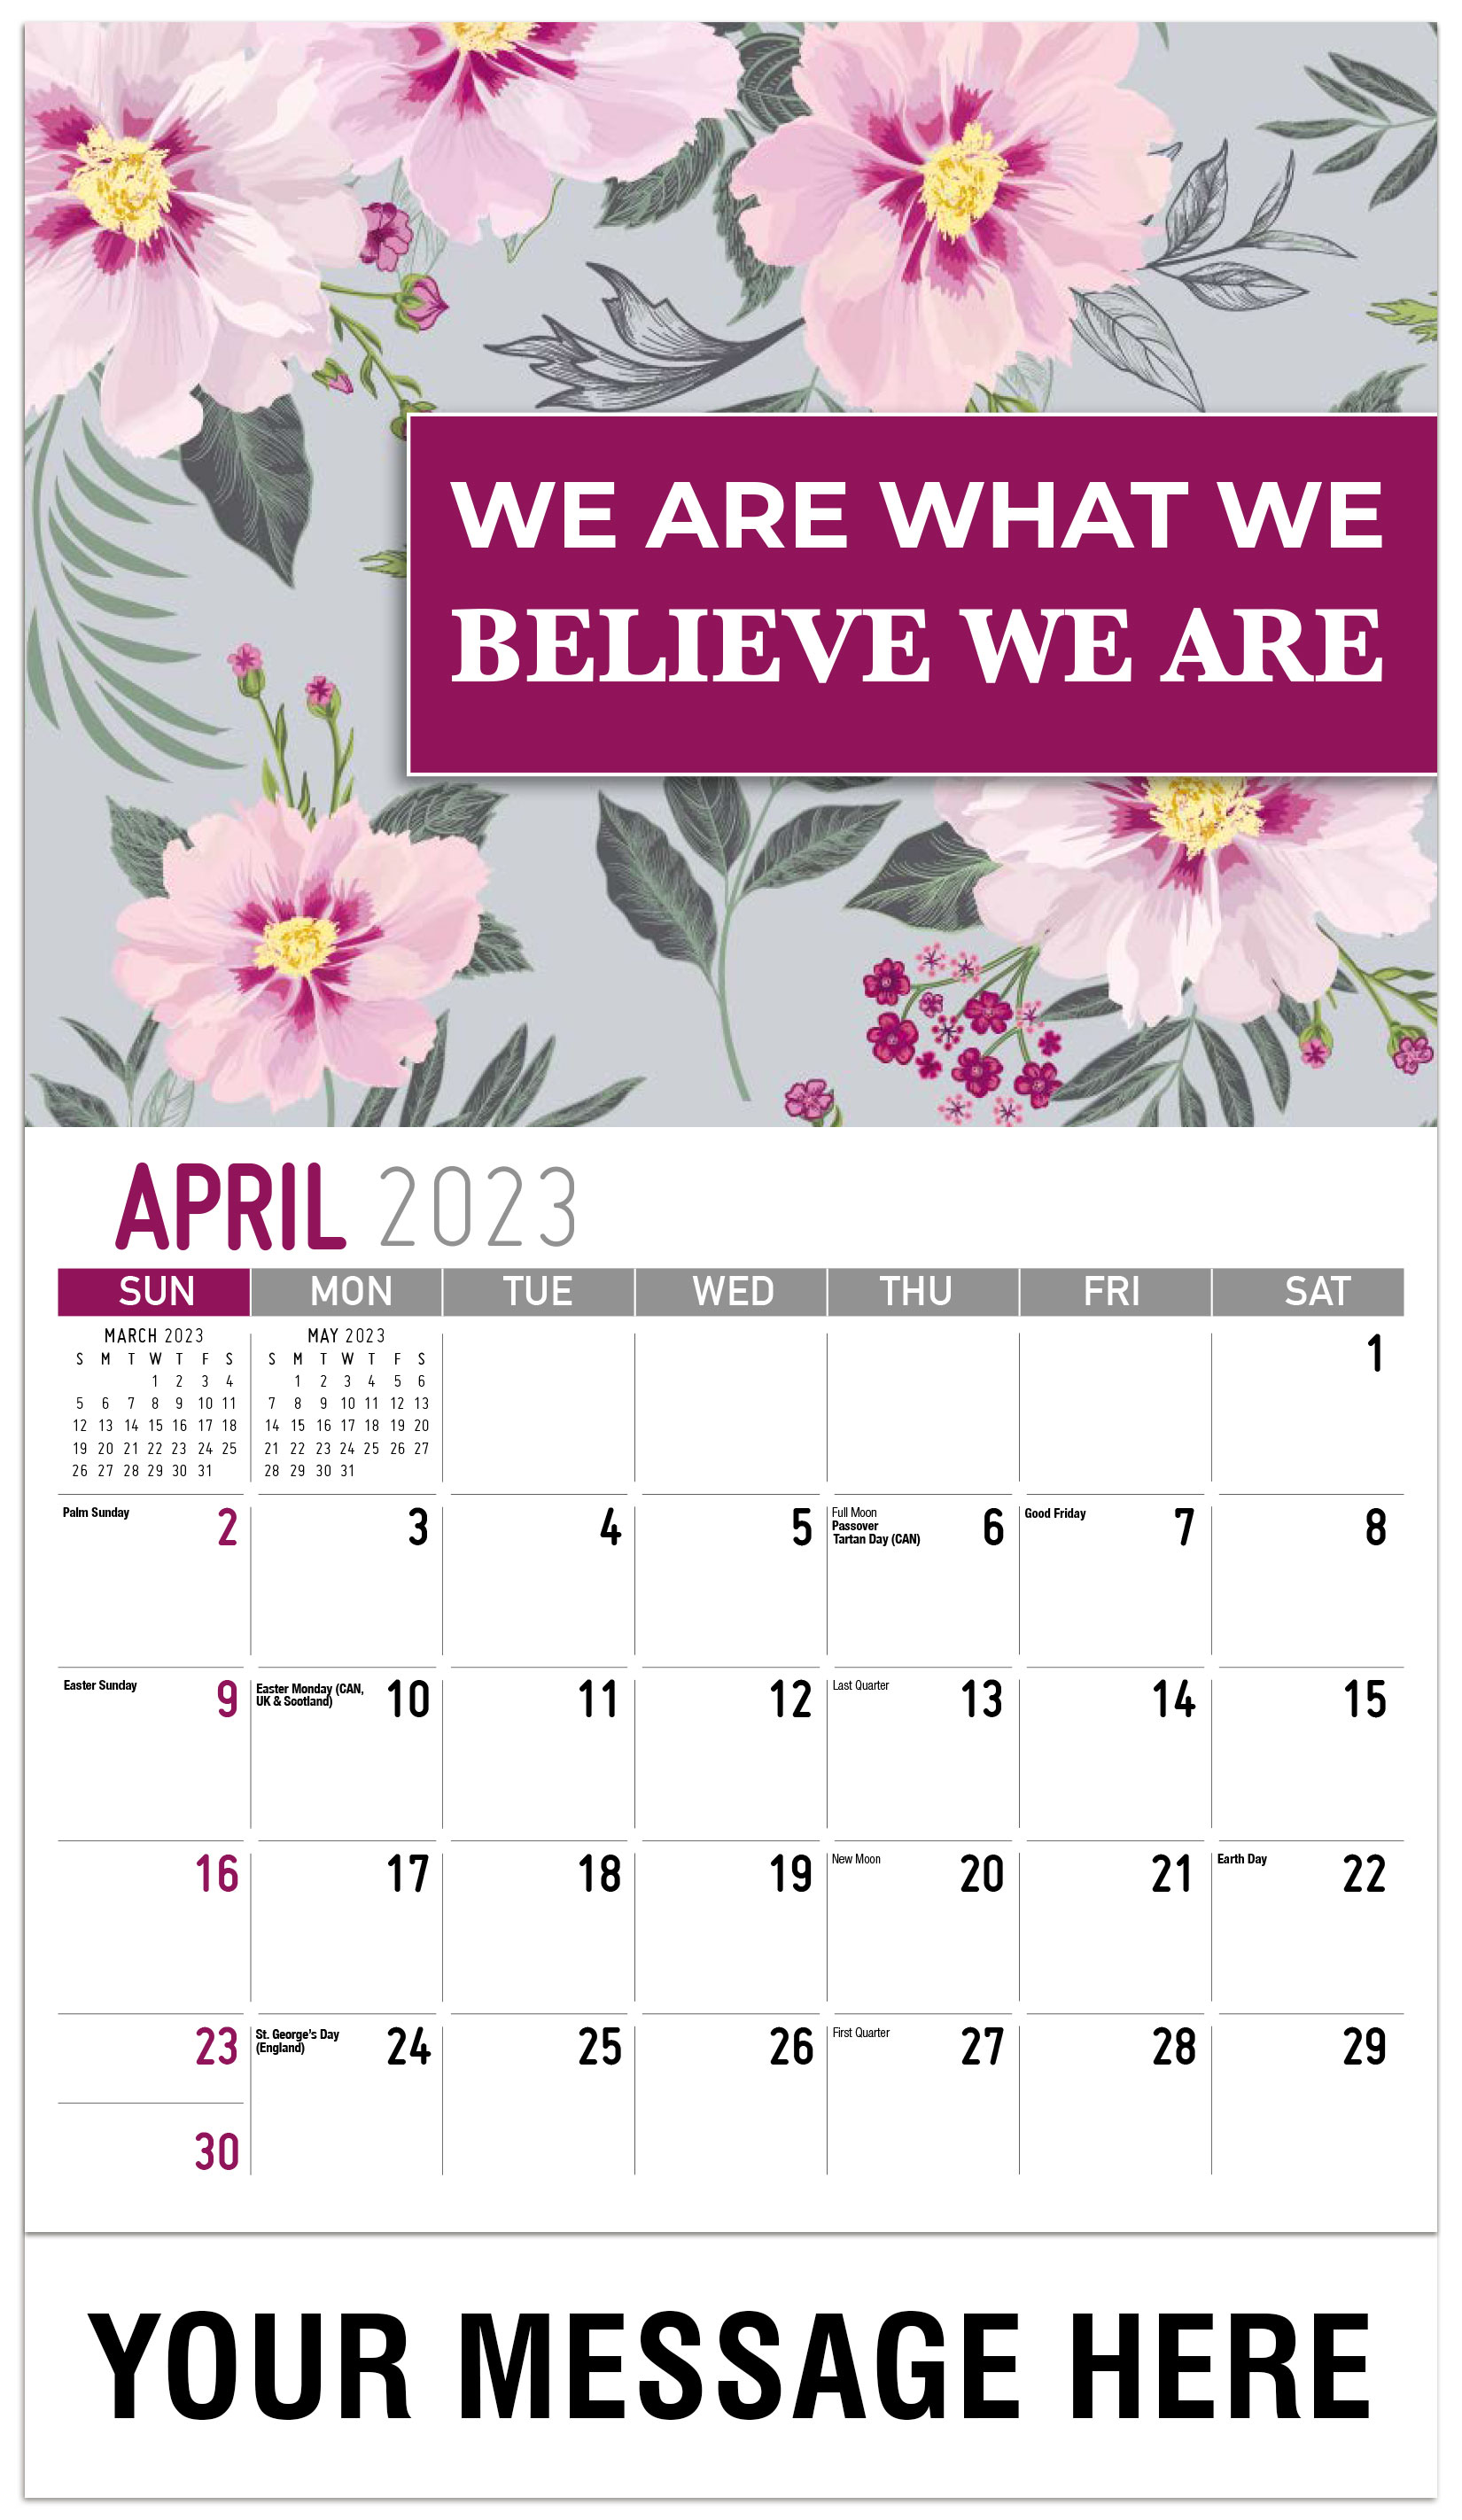 We Are What We 
Believe We Are - April - Arts and Thoughts 2023 Promotional Calendar